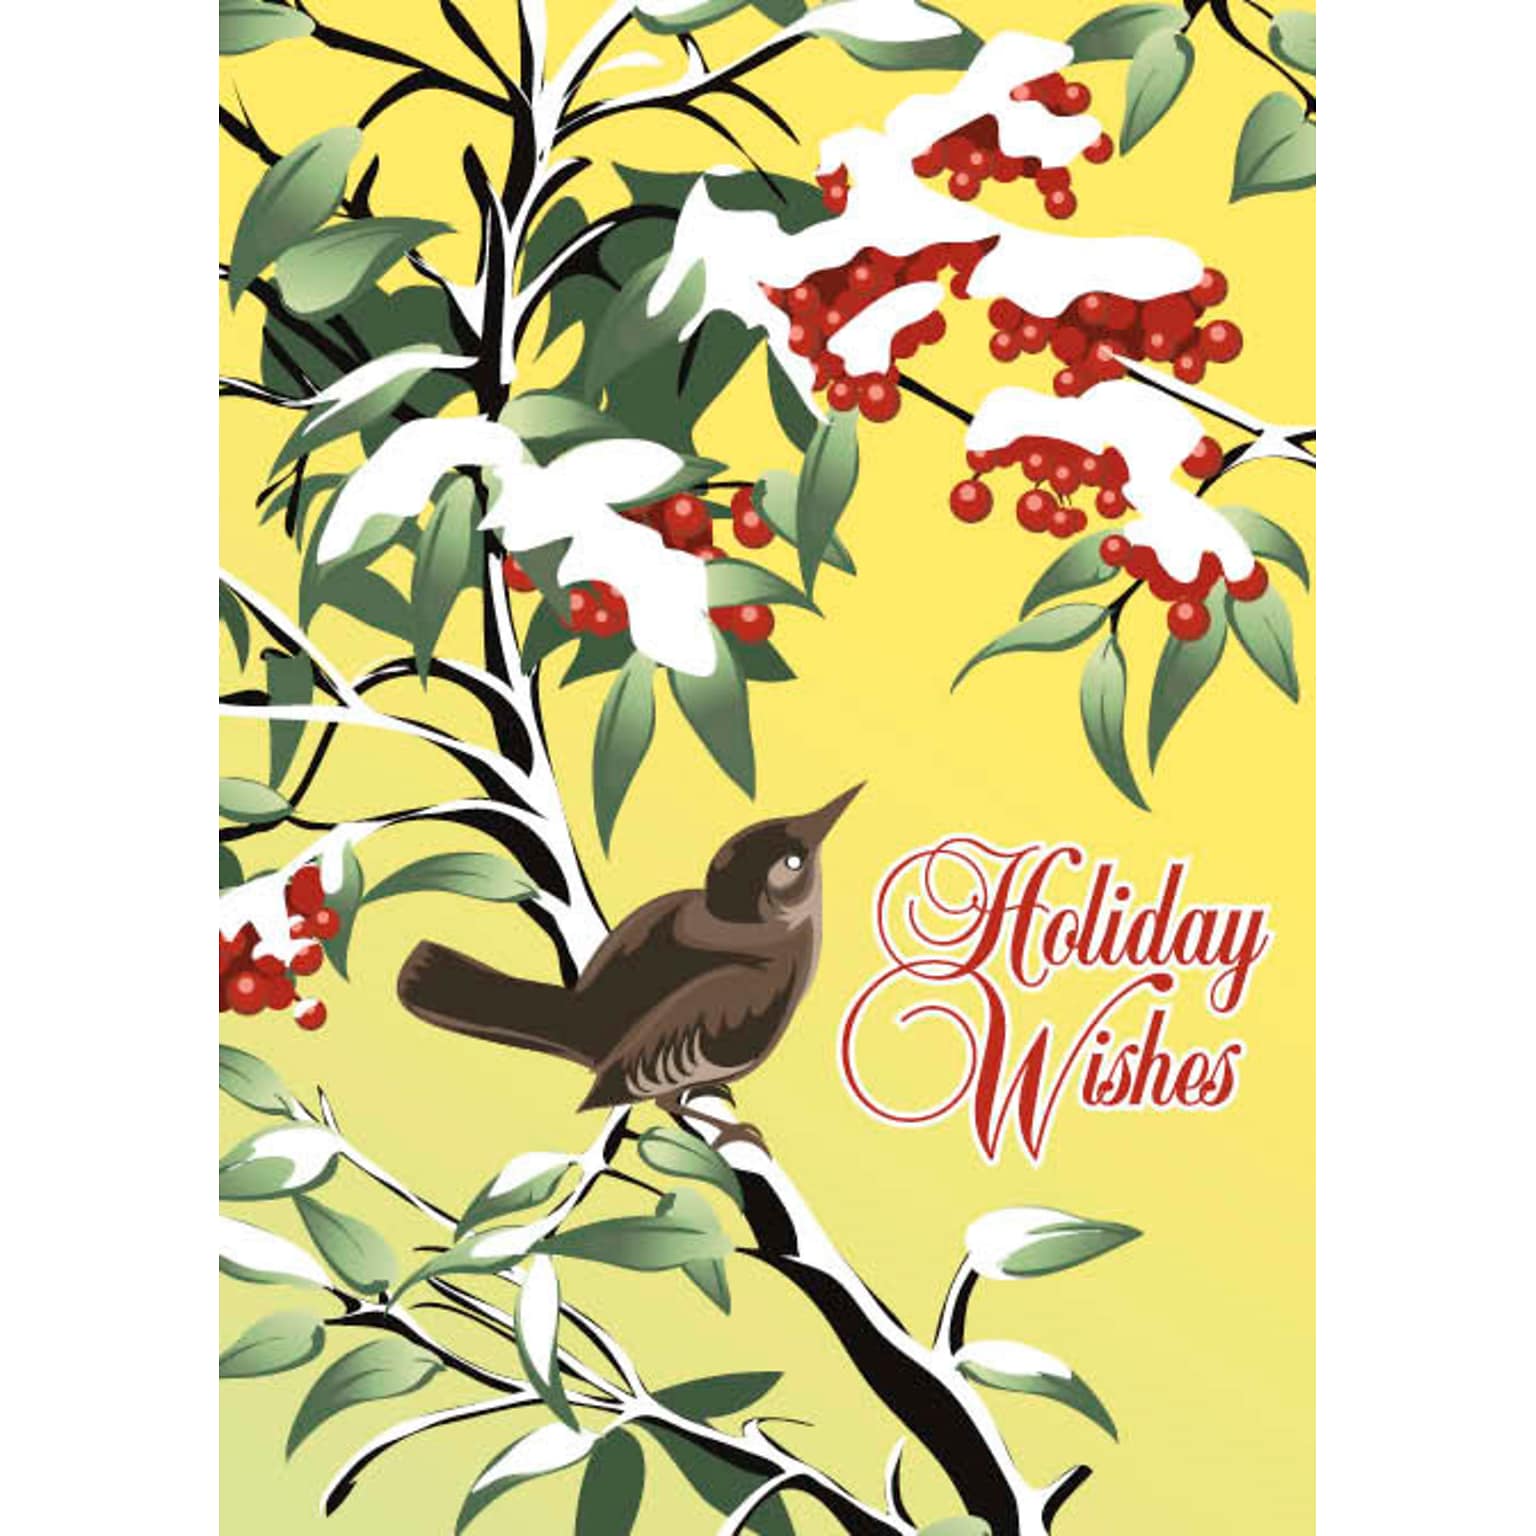 Holiday Wishes Bird On Tree Branch Holiday Greeting Cards, With A7 Envelopes, 7 x 5, 25 Cards per Set